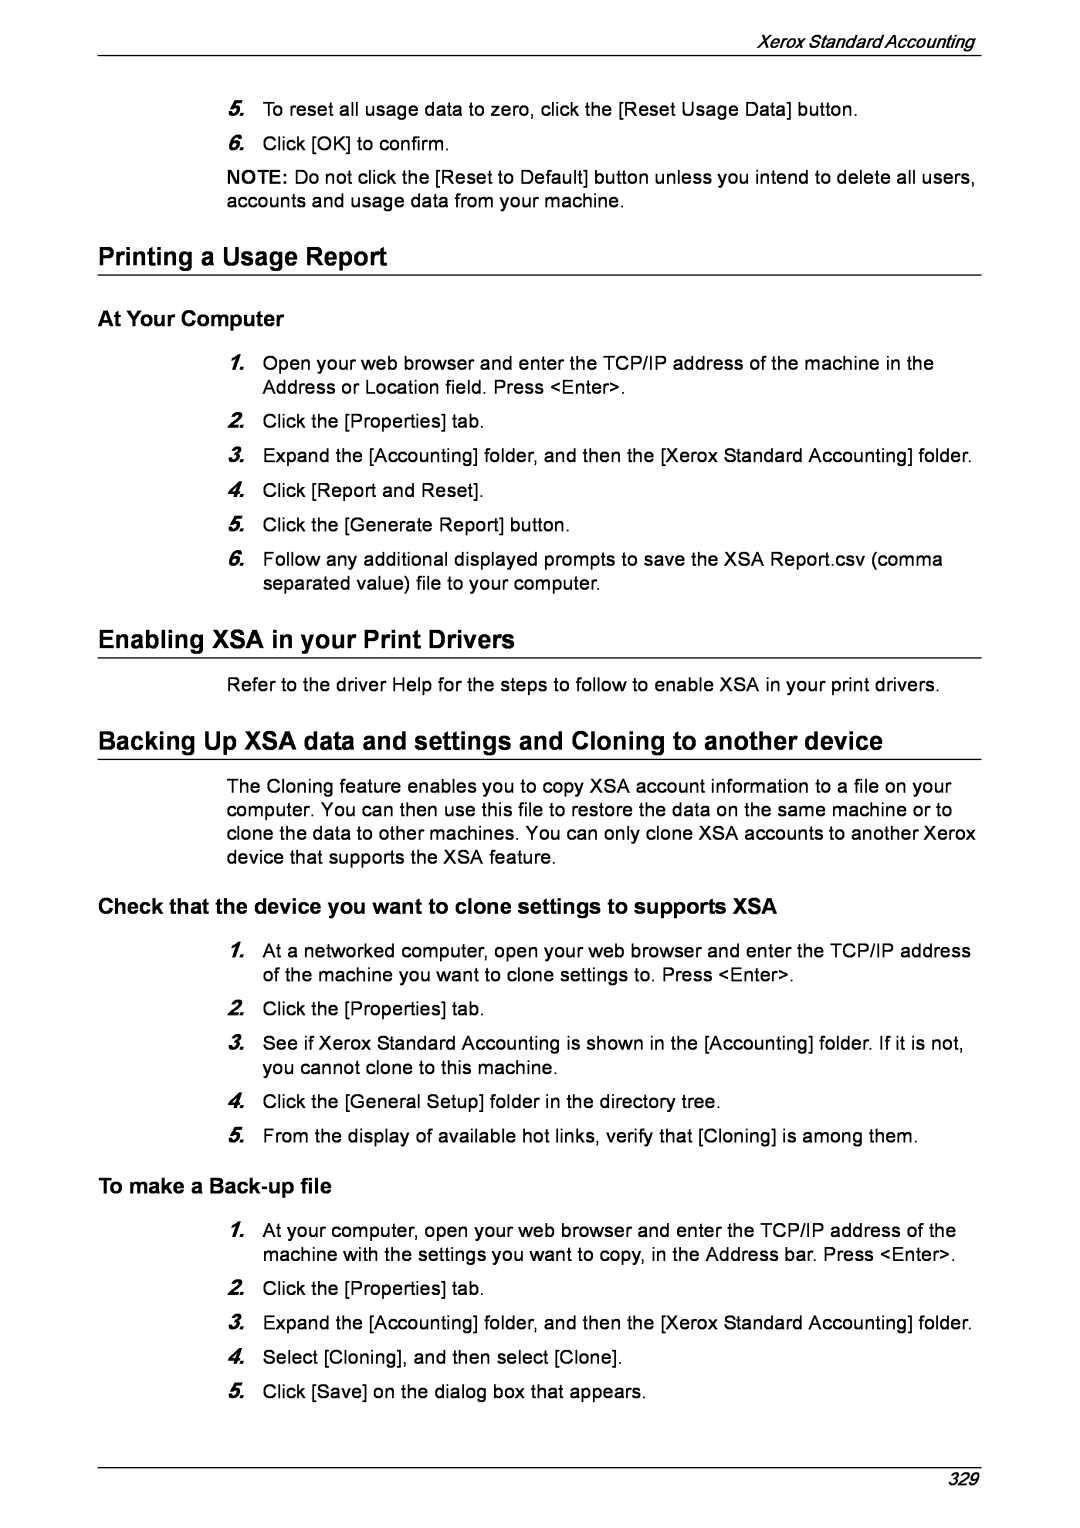 Xerox 5222 manual Printing a Usage Report, Enabling XSA in your Print Drivers, At Your Computer, To make a Back-upfile 